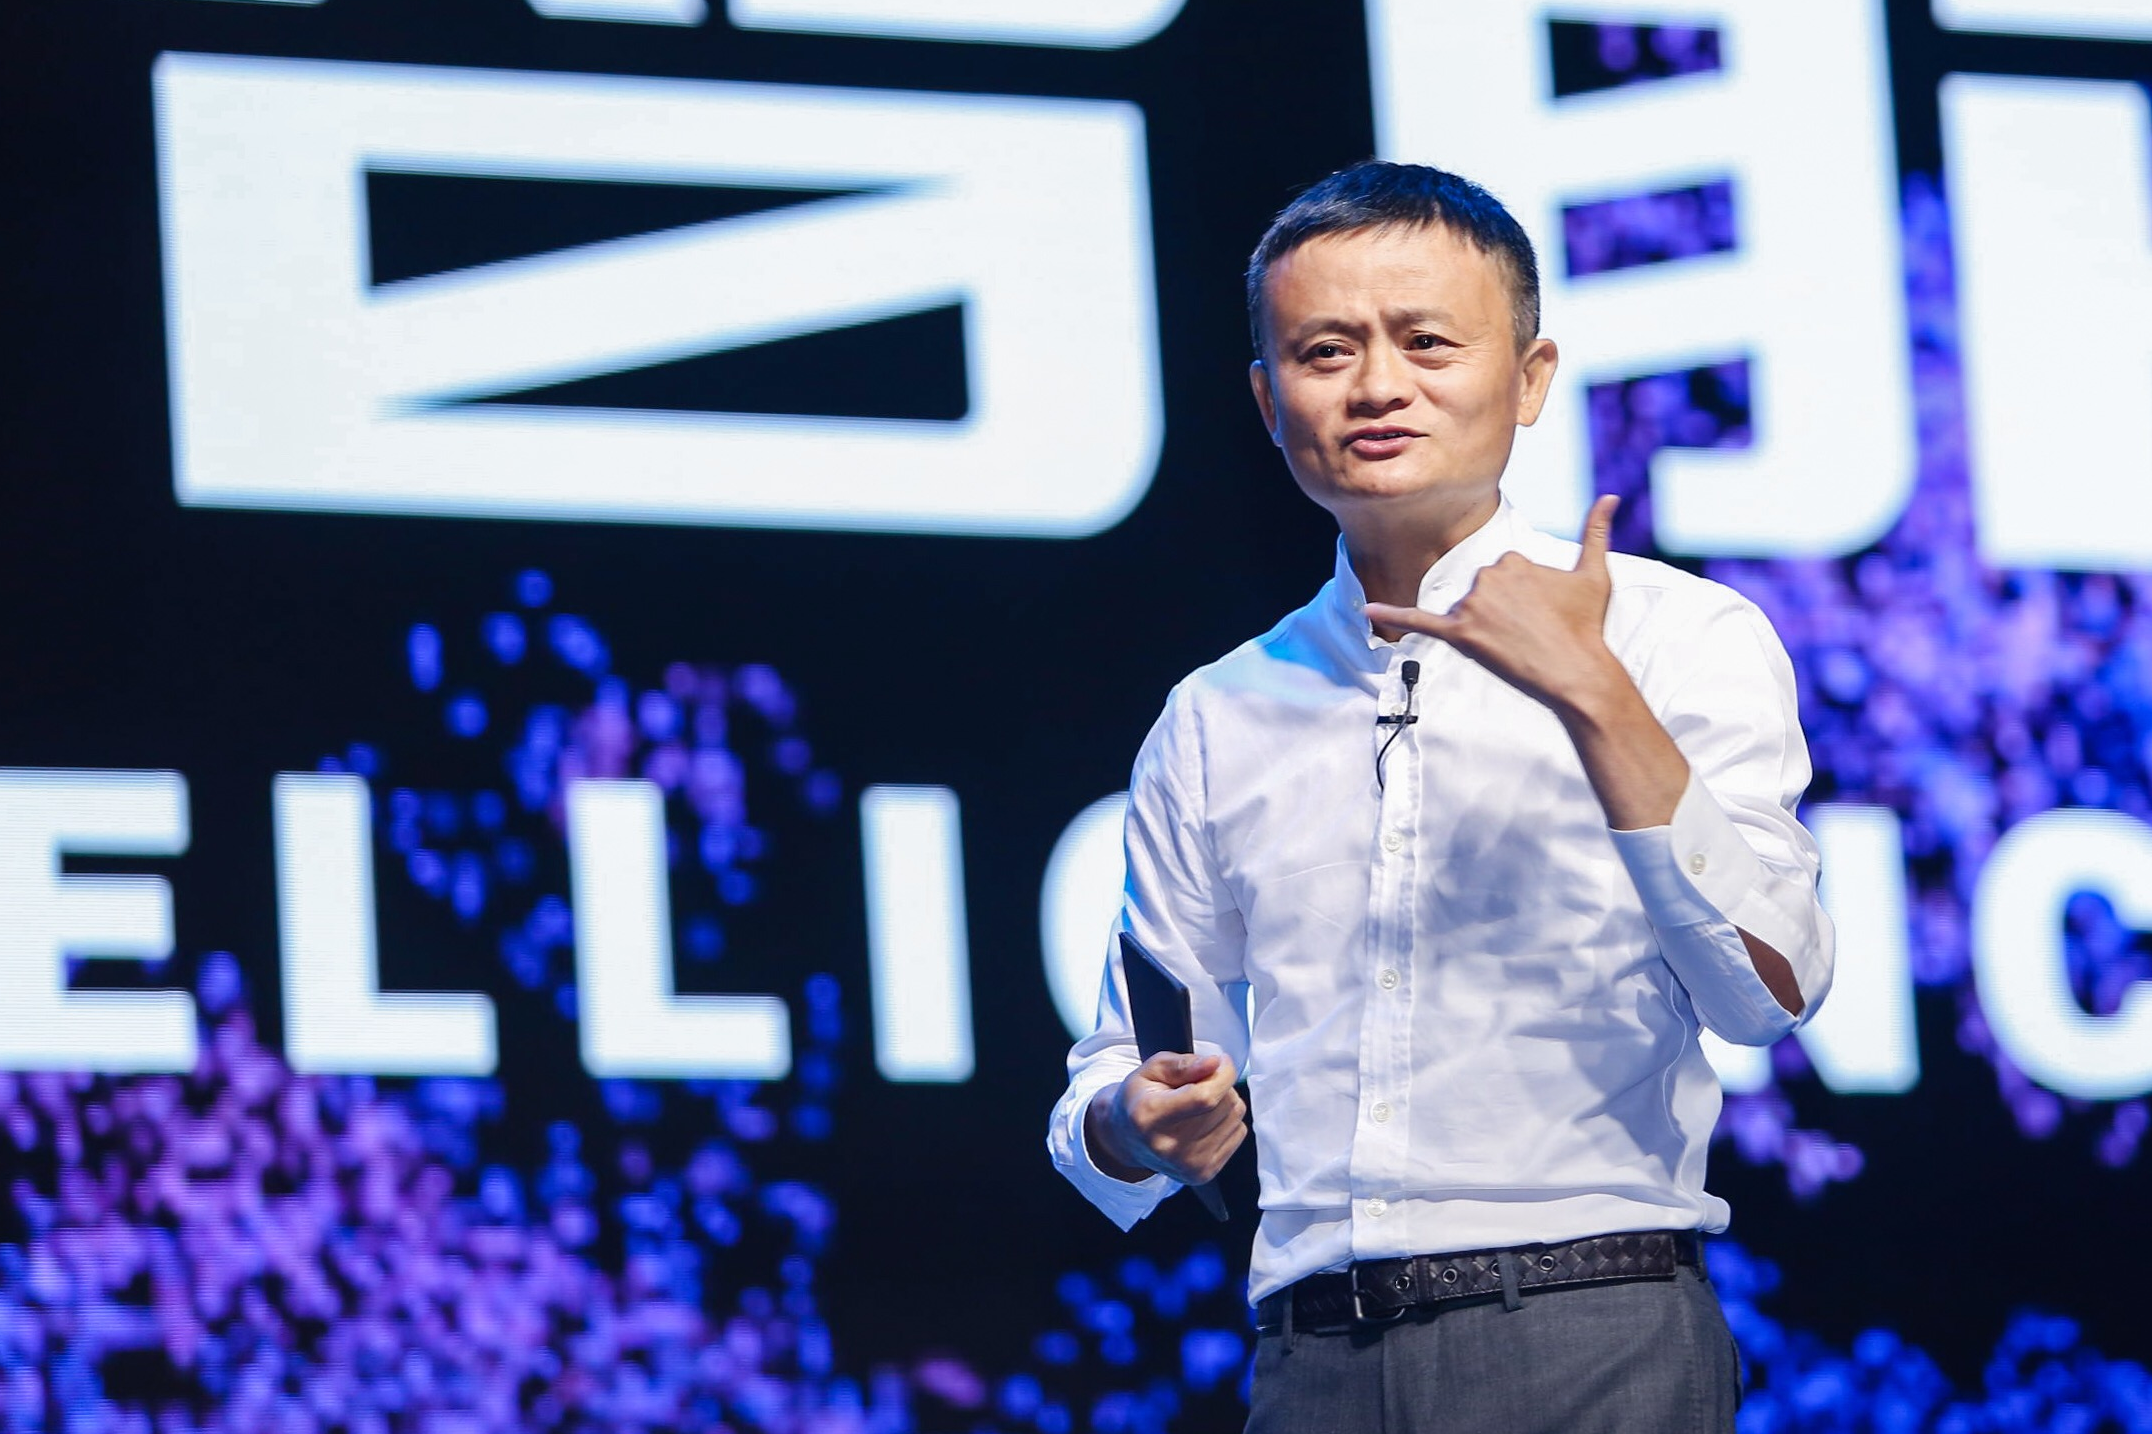 Jack Ma Goes for Blockchain, But Bitcoin Is “Still a Bubble”